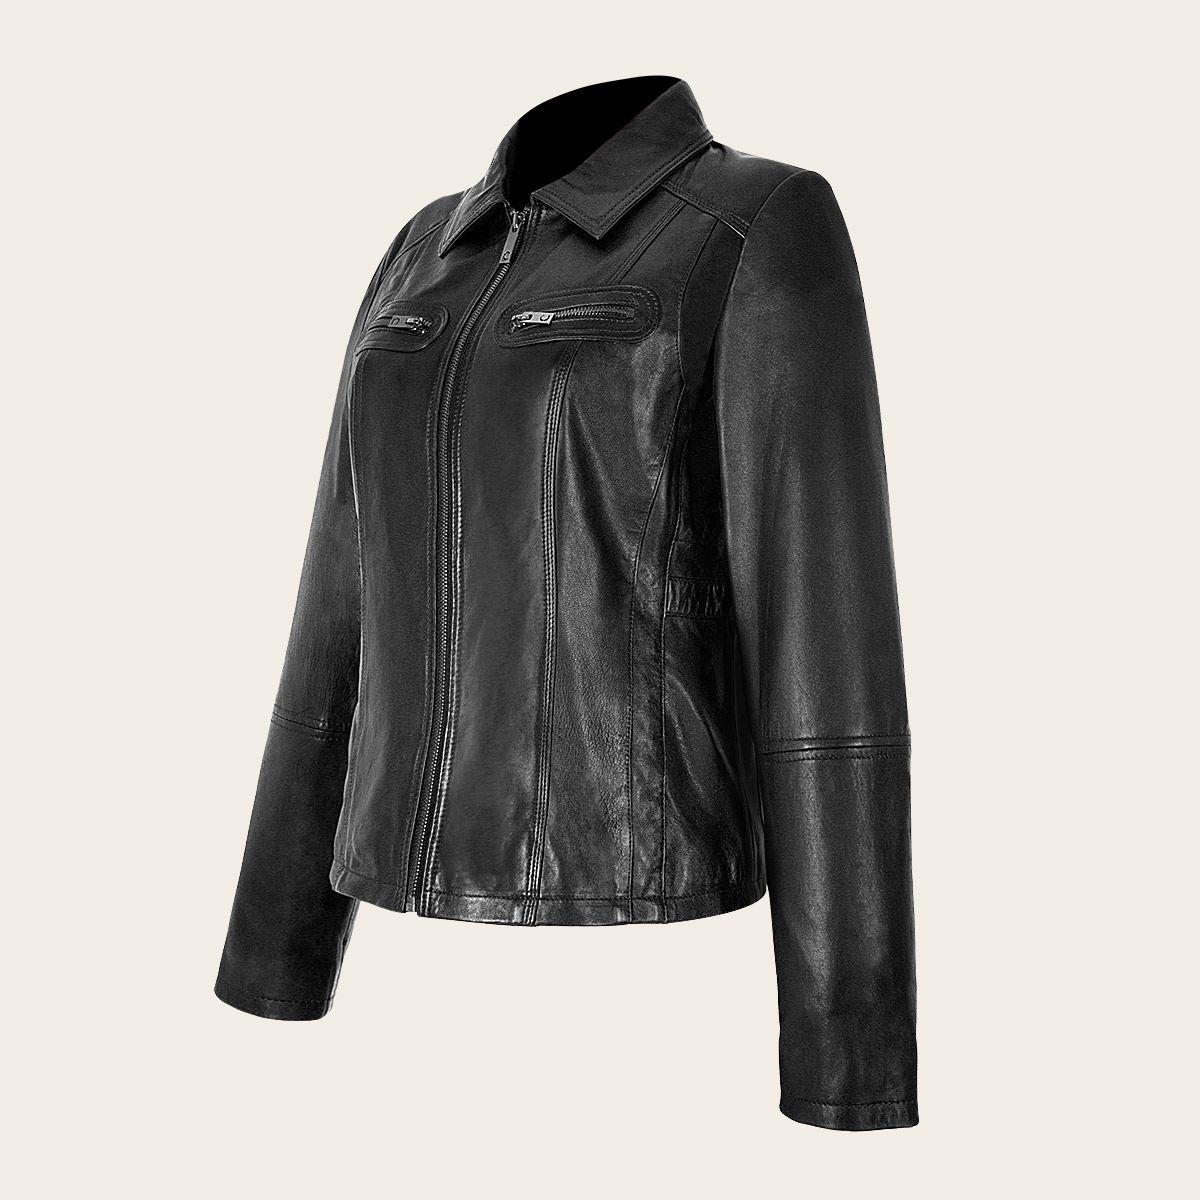 Womens black leather jacket with decorative pockets